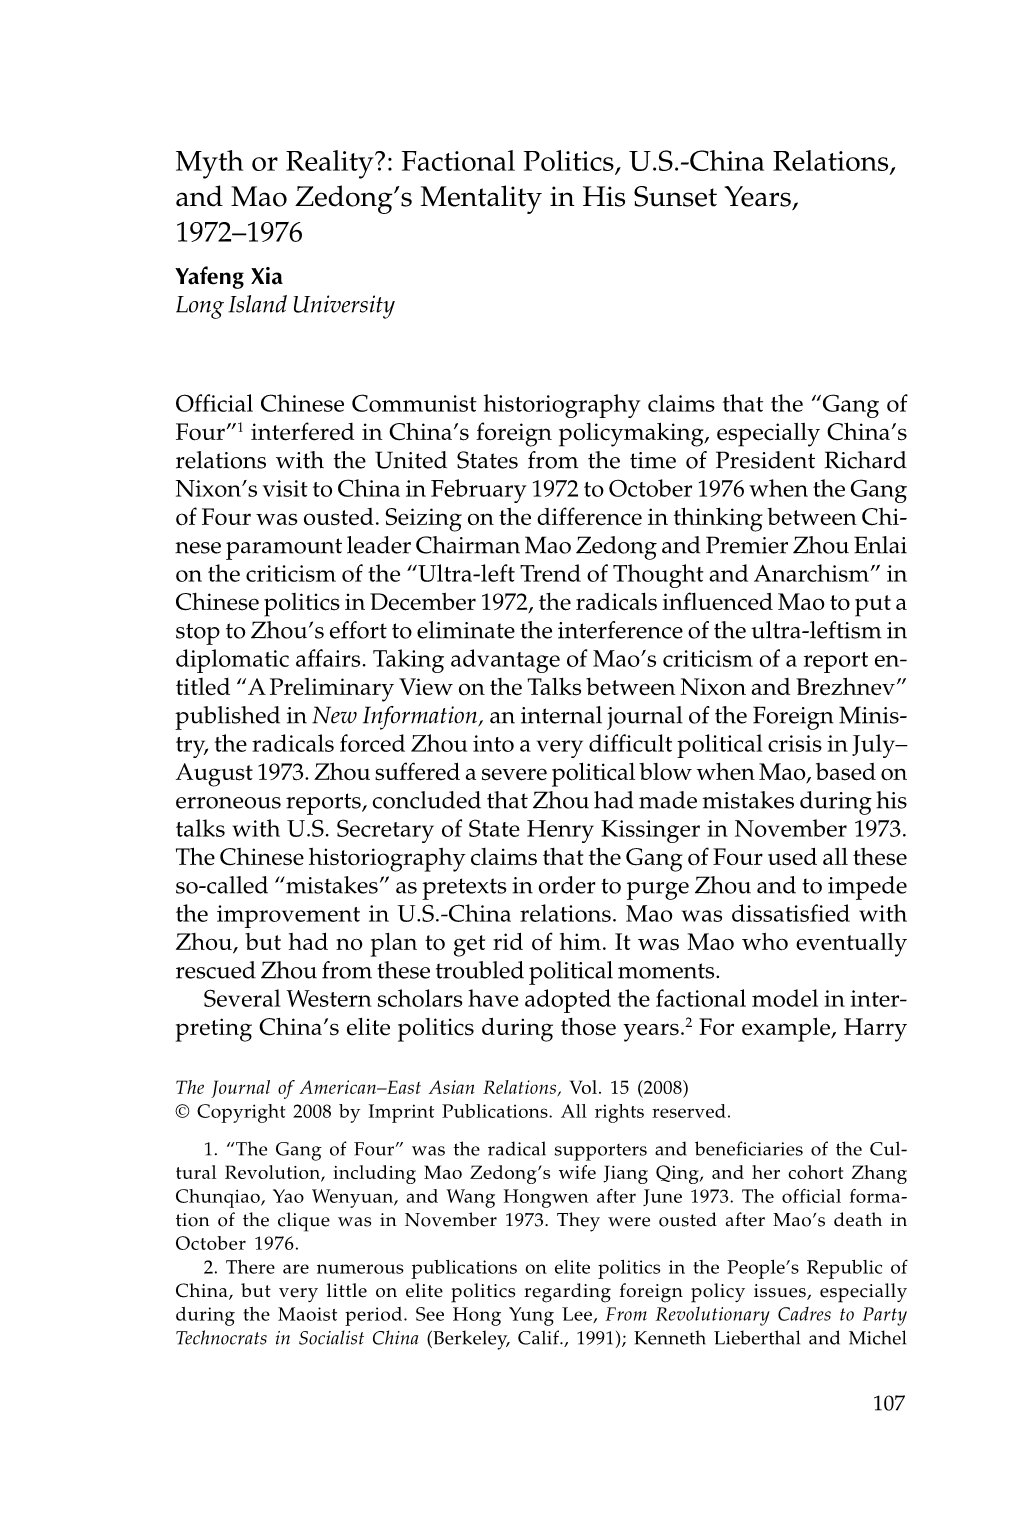 Factional Politics, US-China Relations, and Mao Zedong's Mentality